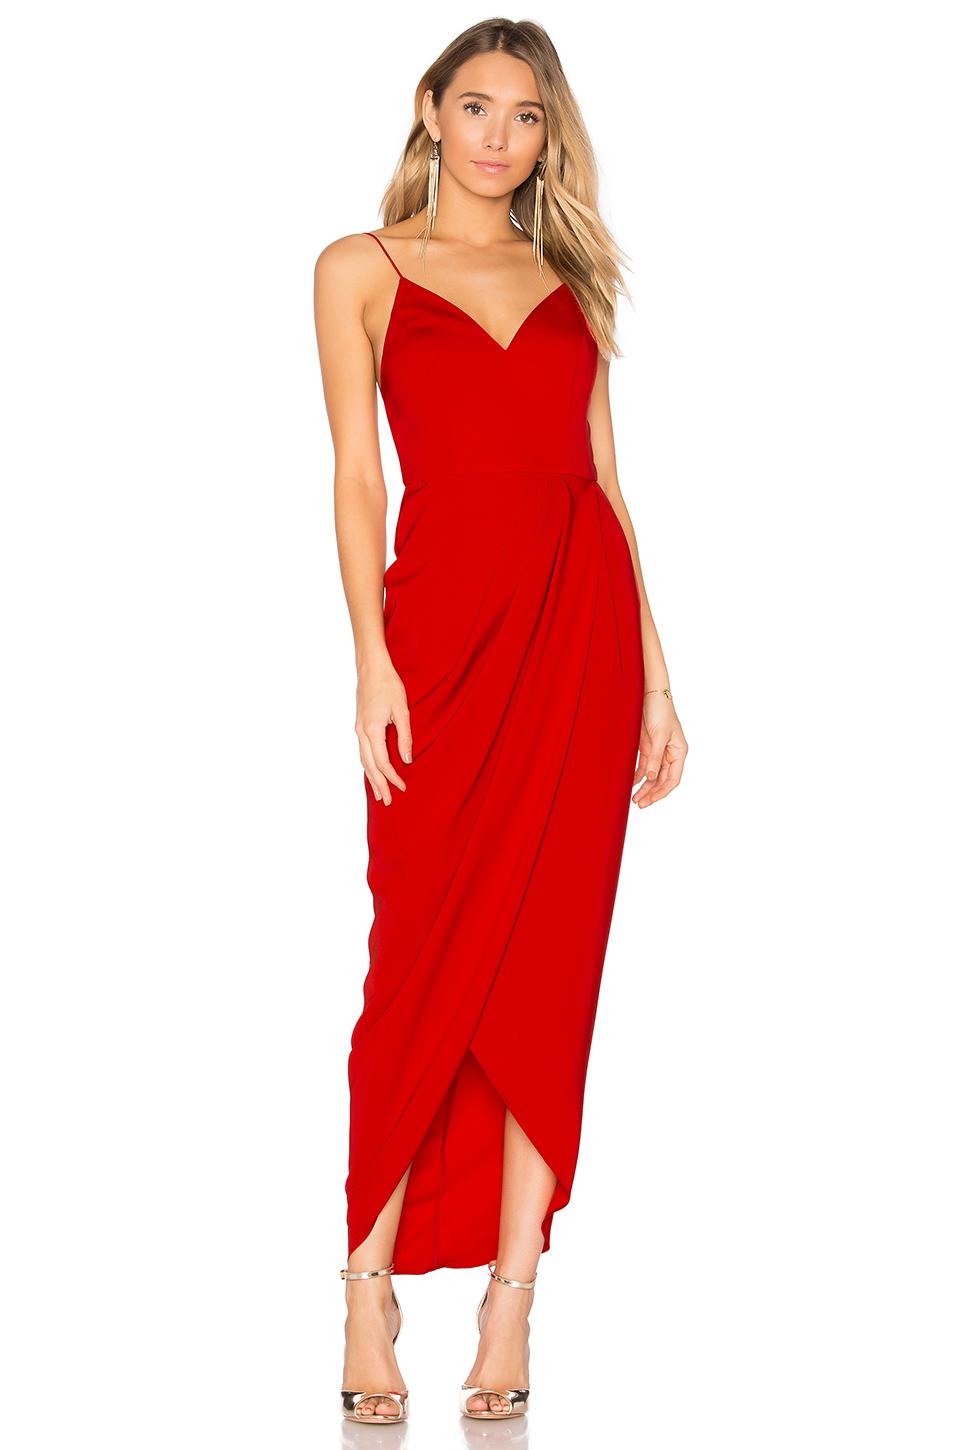 Shona Joy Cocktail Draped Dress in Red - Lyst